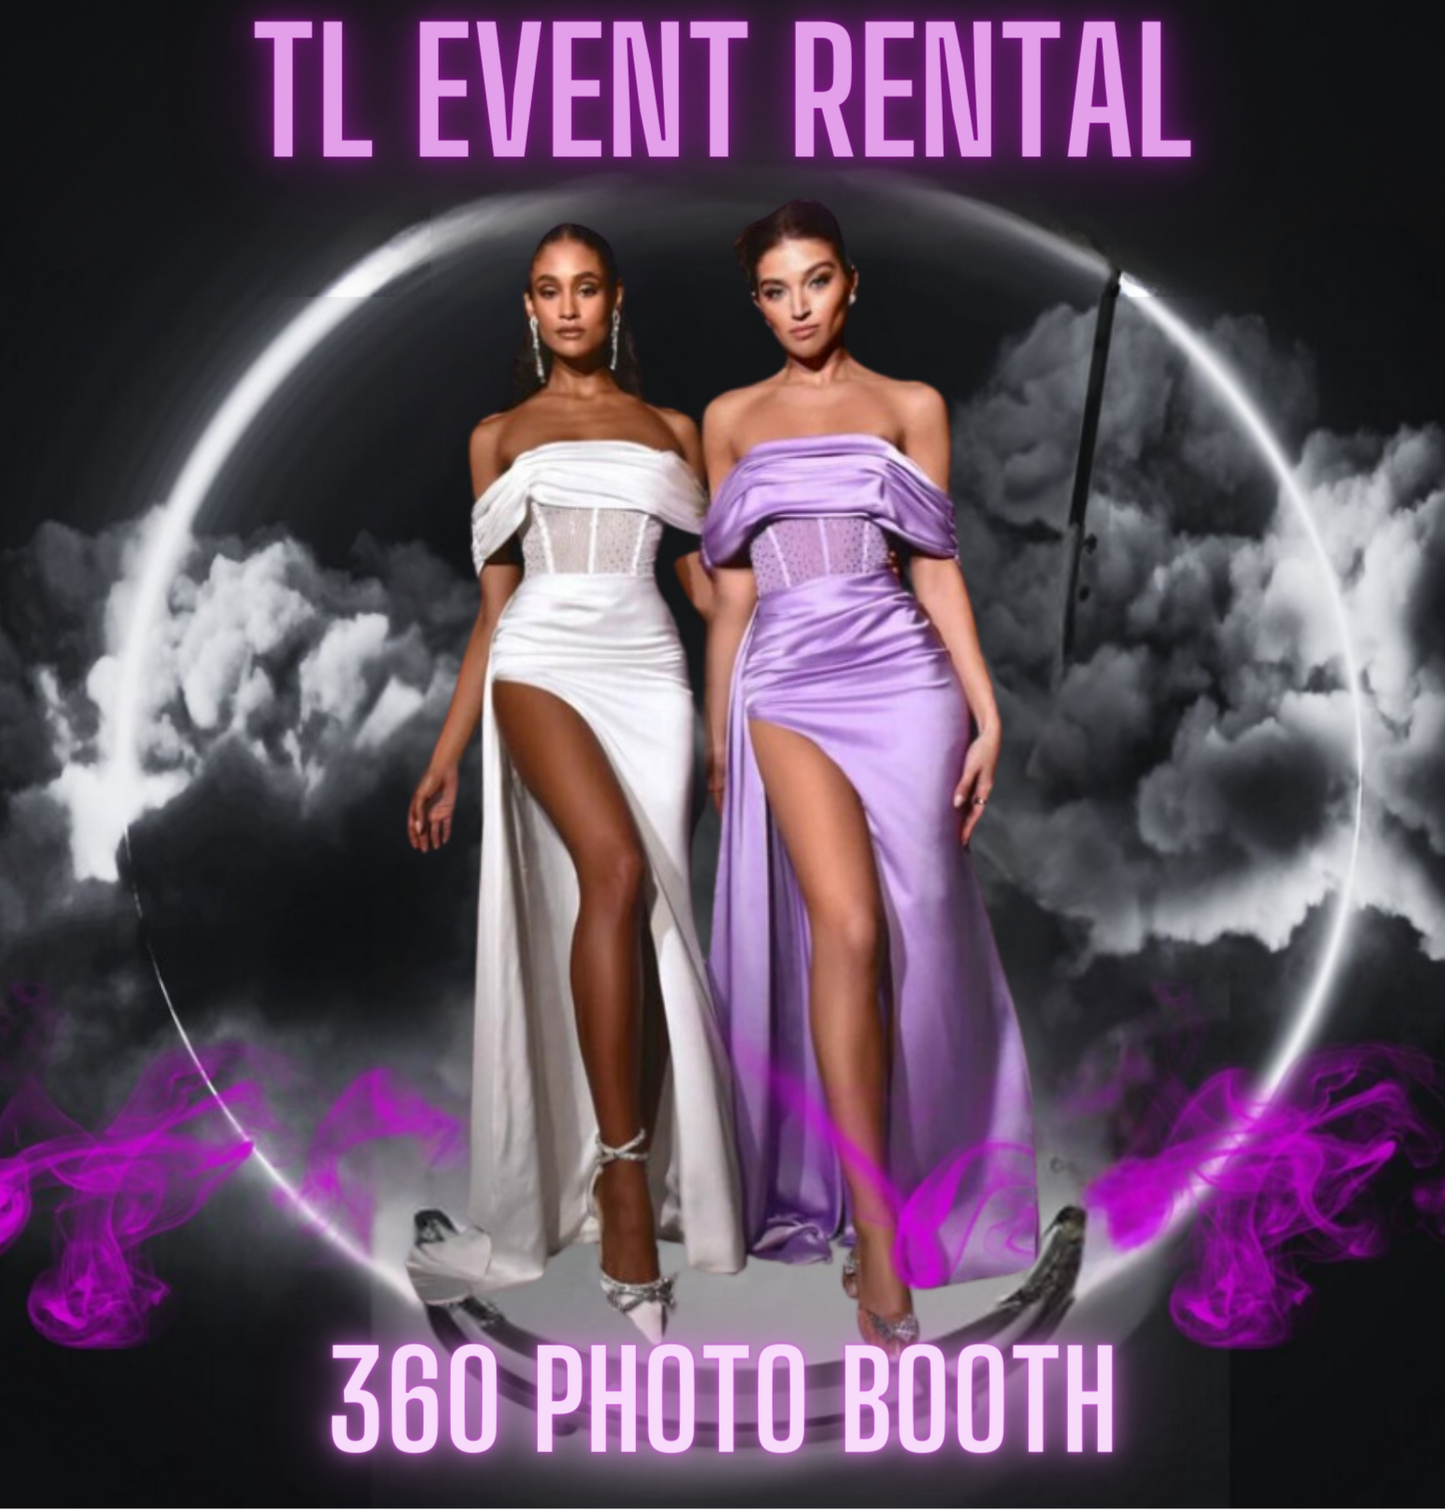 360 Photo Studio Booth - Rental (Price reflect 2hrs w/ Event Staff)